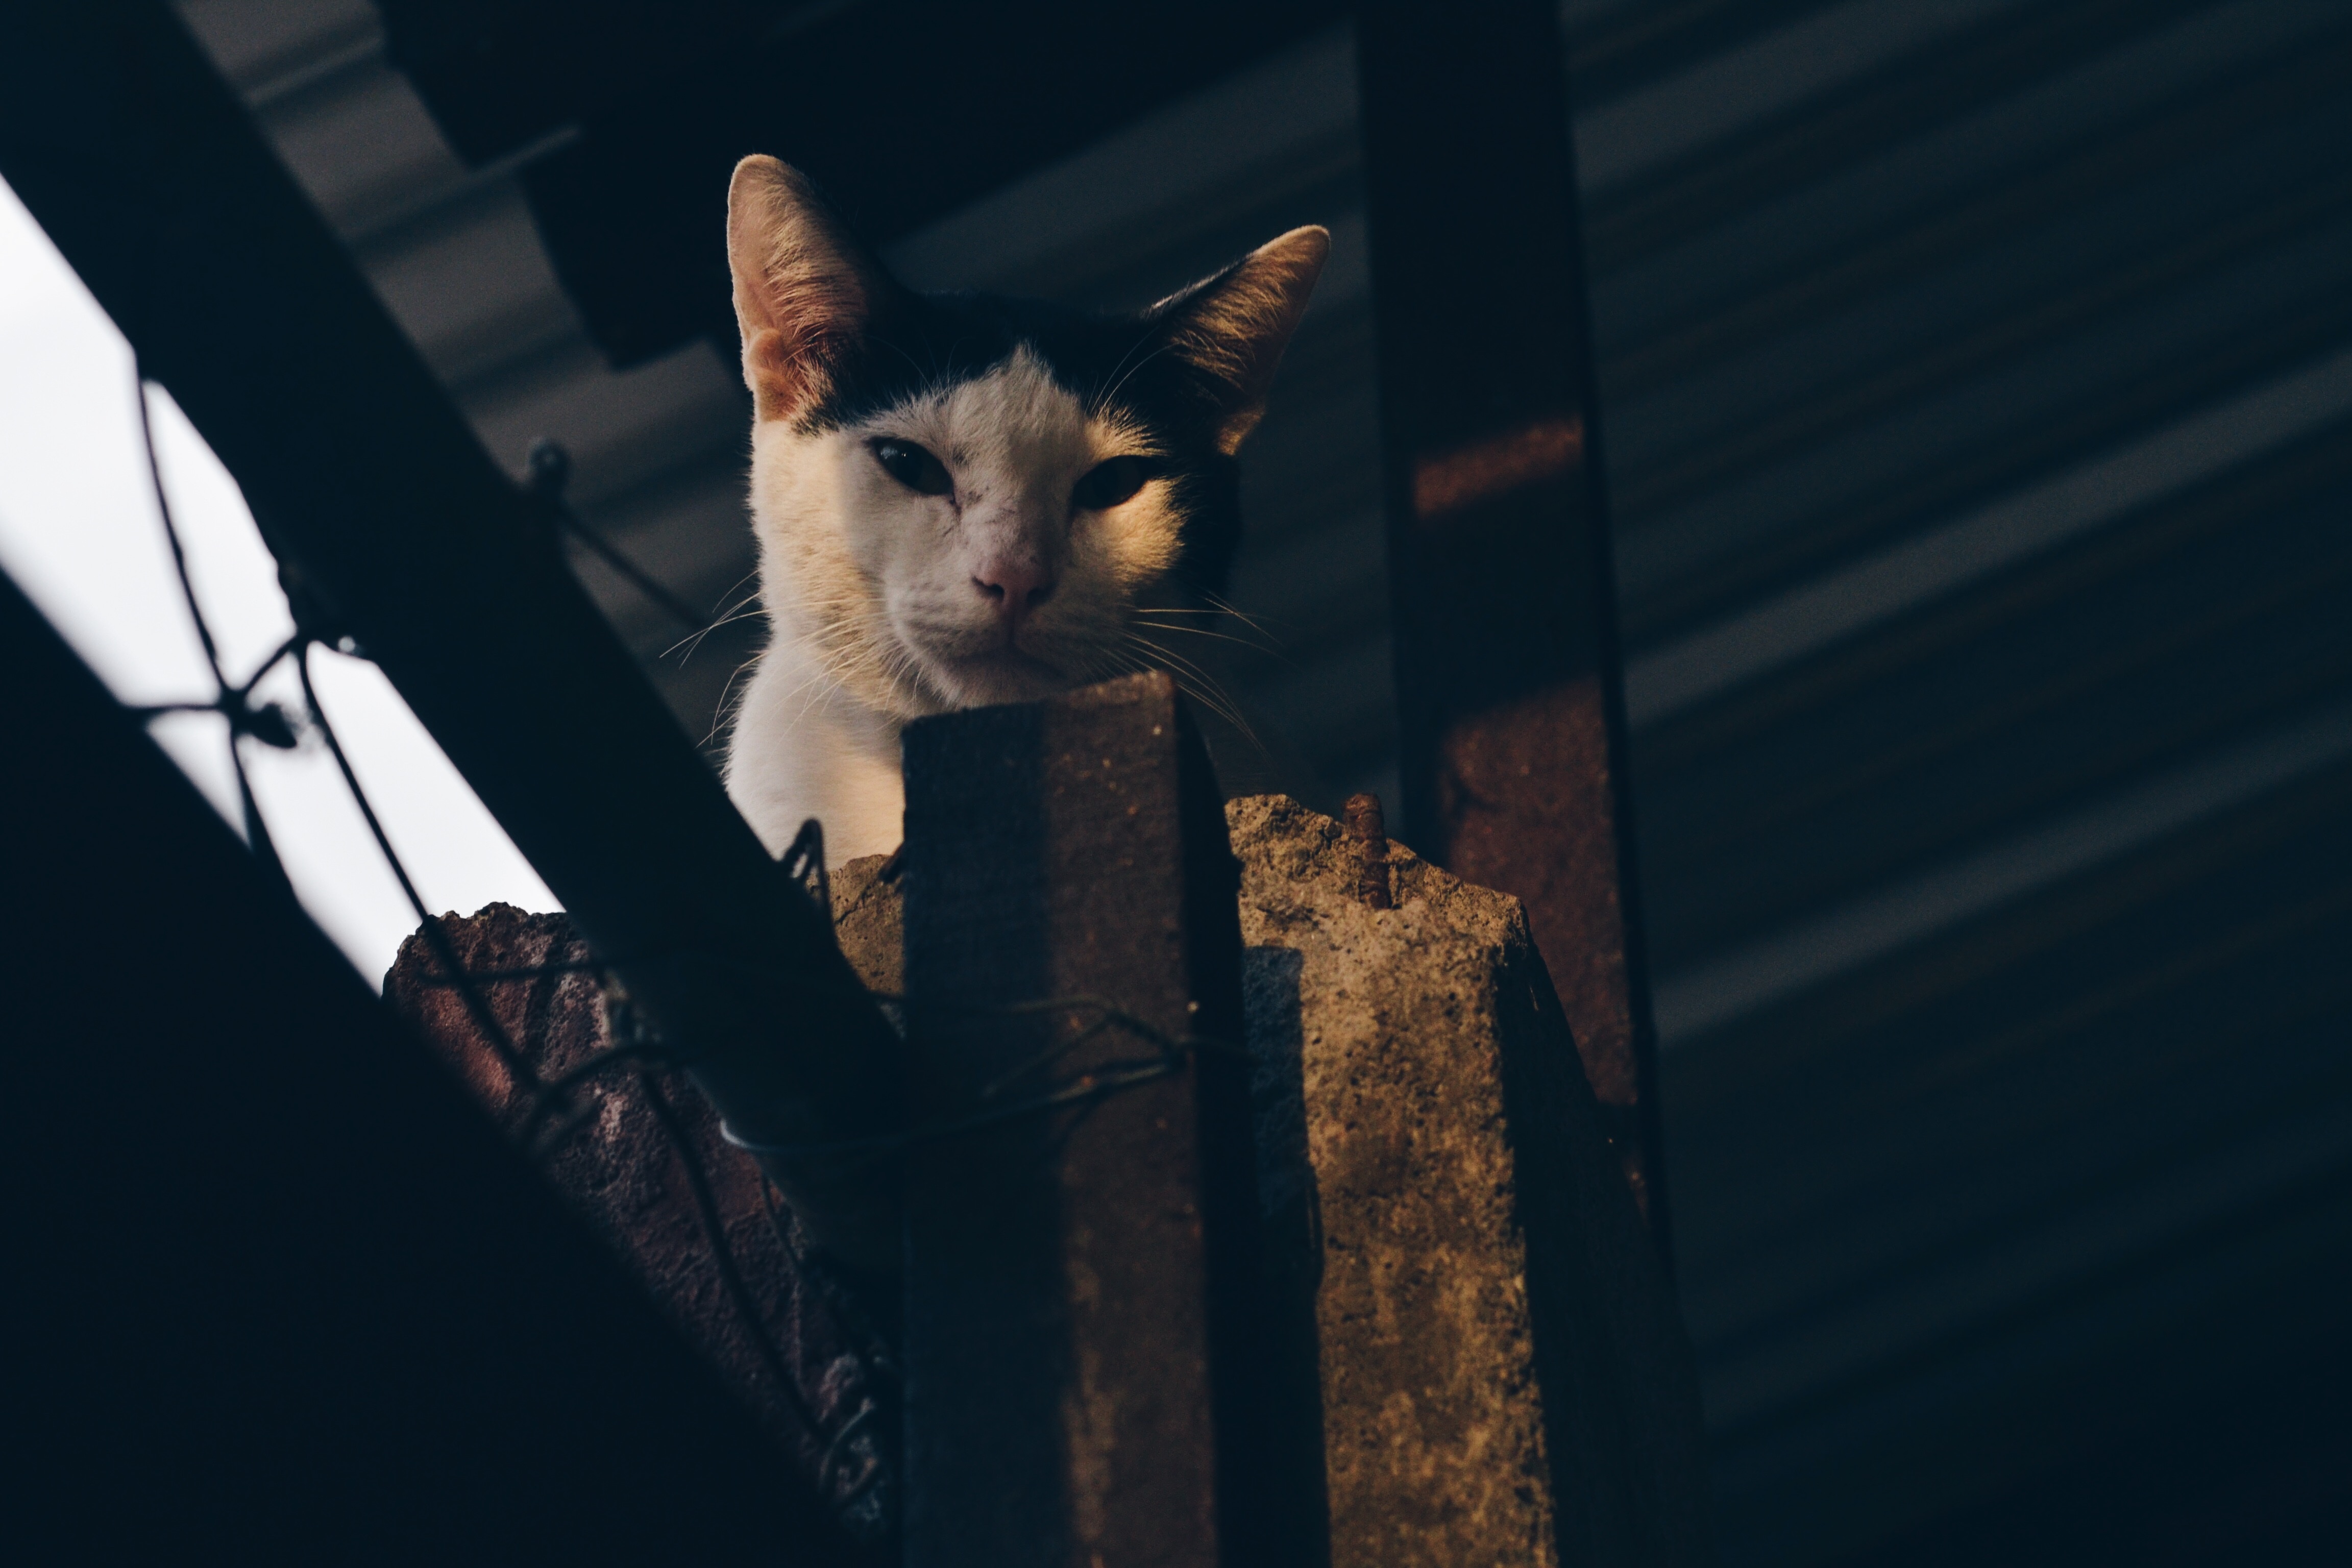 Free photo A street cat with white and black coloring watches from a height